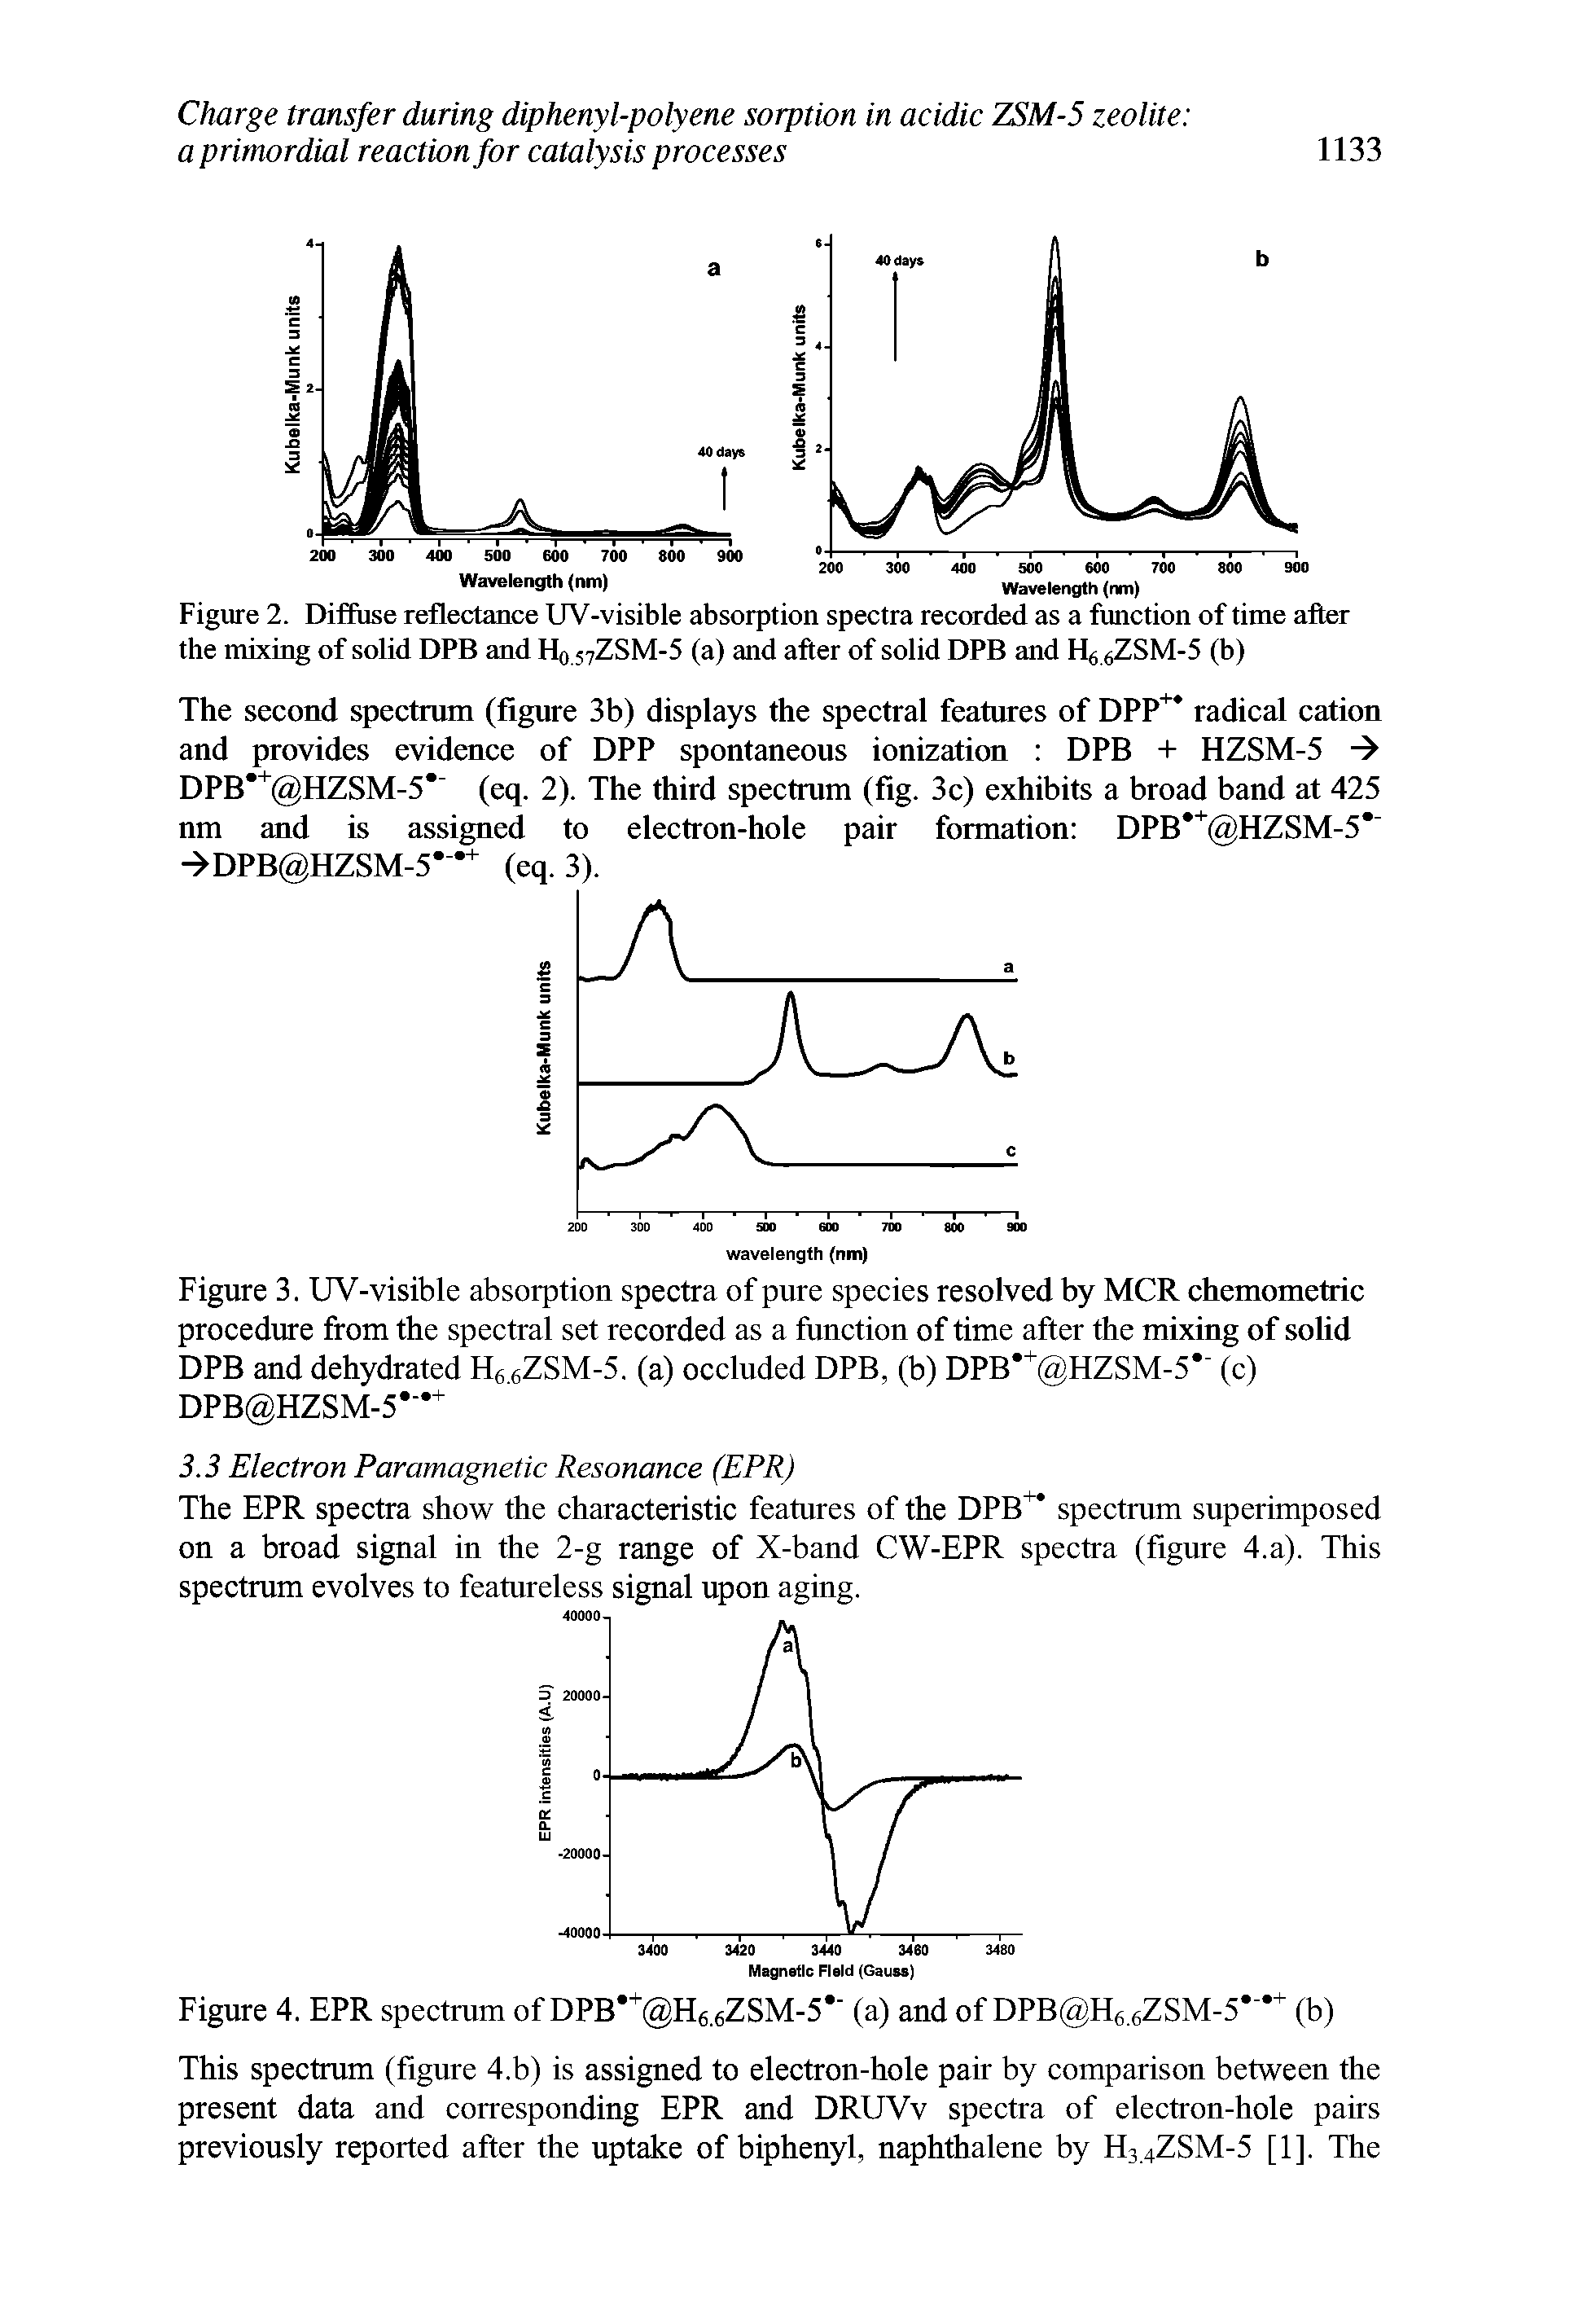 Figure 3. UV-visible absorption spectra of pure species resolved by MCR chemometric procedure from the spectral set recorded as a function of time after the mixing of solid DPB and dehydrated H6.6ZSM-5. (a) occluded DPB, (b) DPB + HZSM-5 (c) DPB HZSM-5 +...